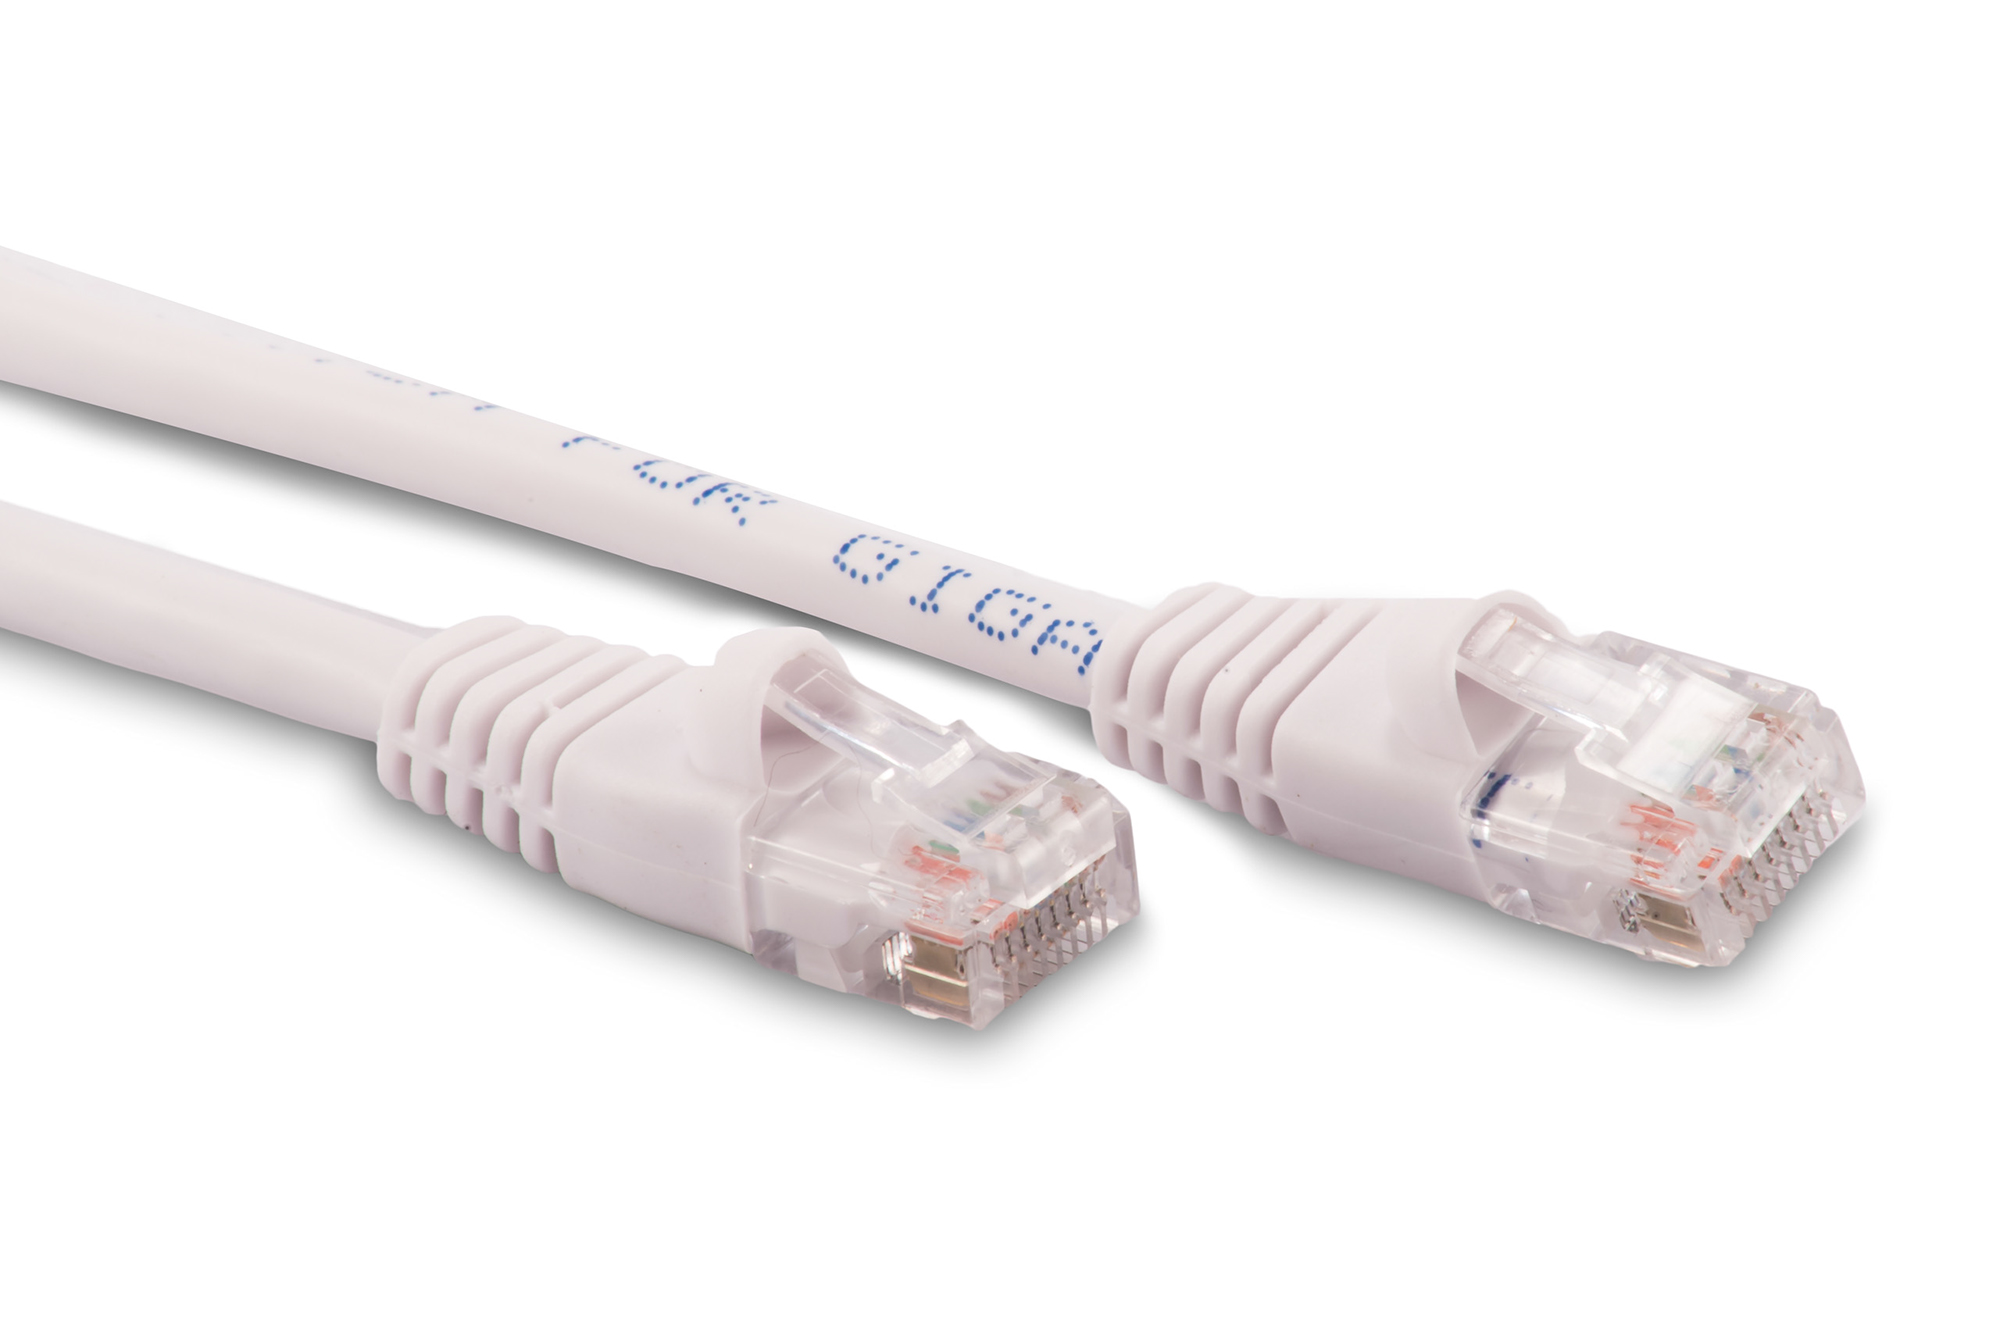 14ft Cat5e Ethernet Patch Cable - White Color - Snagless Boot, Stranded, RJ45, 350Mhz, 24AWG